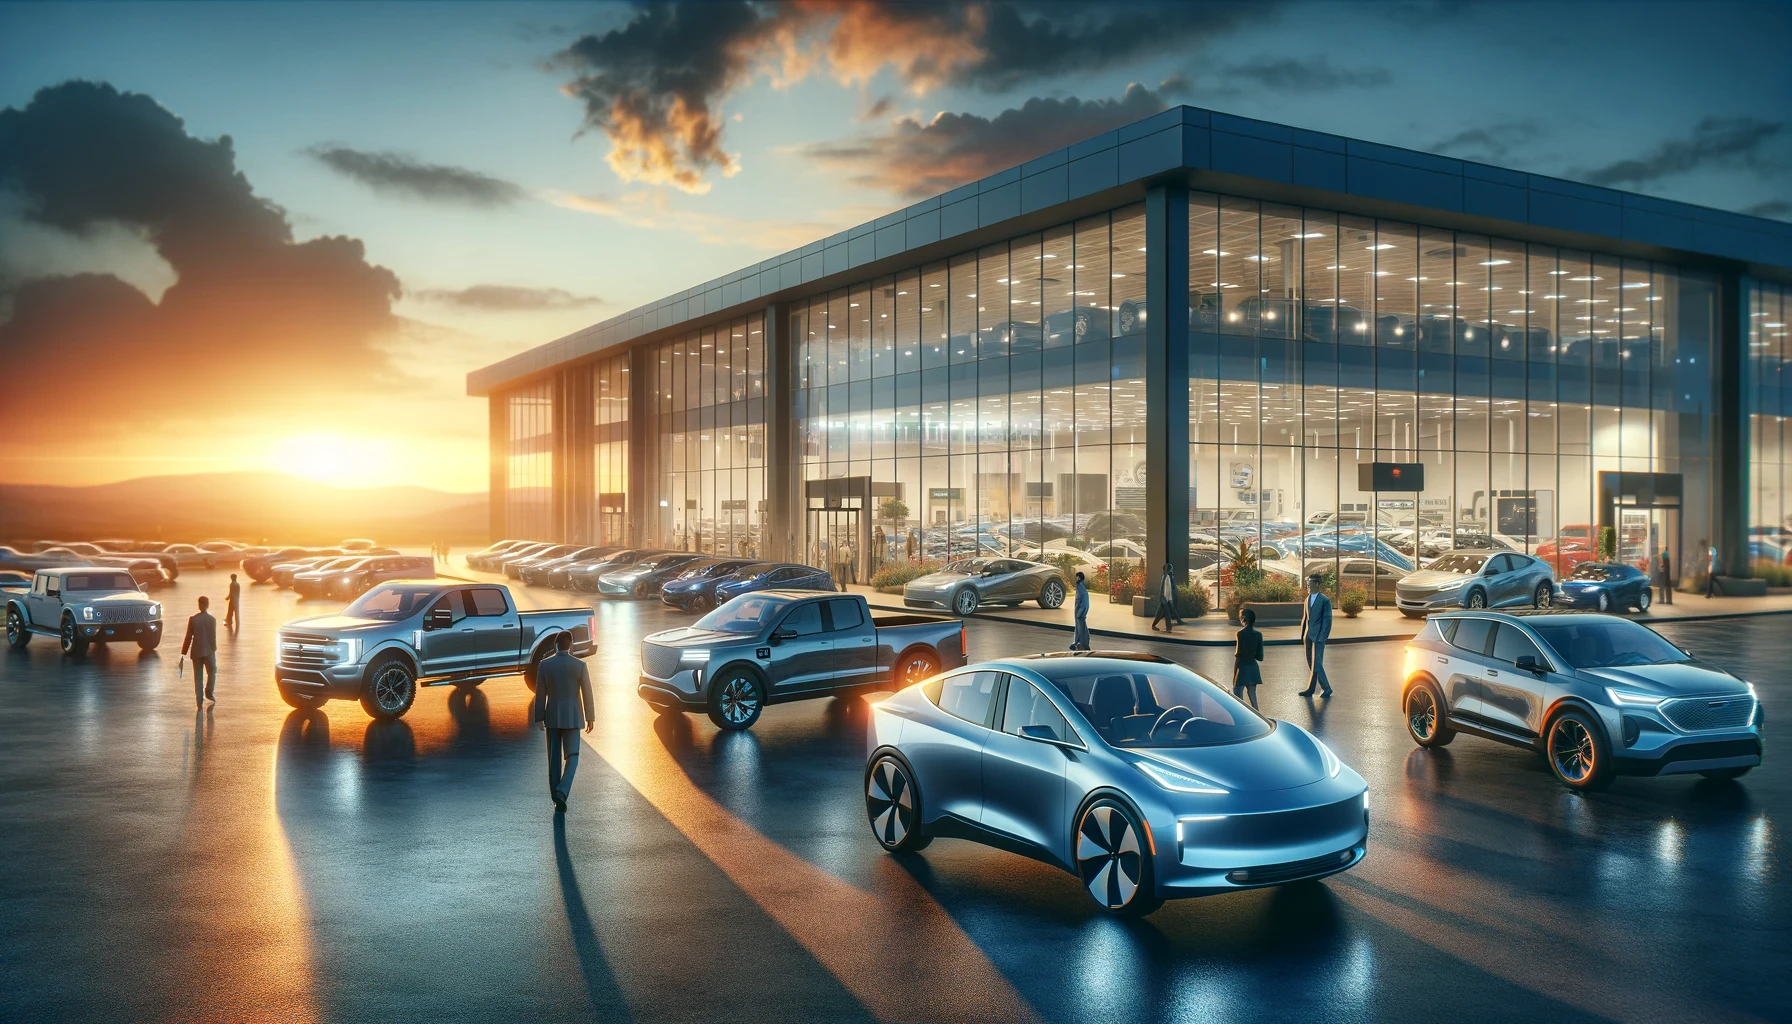 A sunrise scene at a modern car dealership showcasing a mix of electric and traditional vehicles, reflecting innovation and tradition in the auto industry, with customers and salespeople beginning their day.